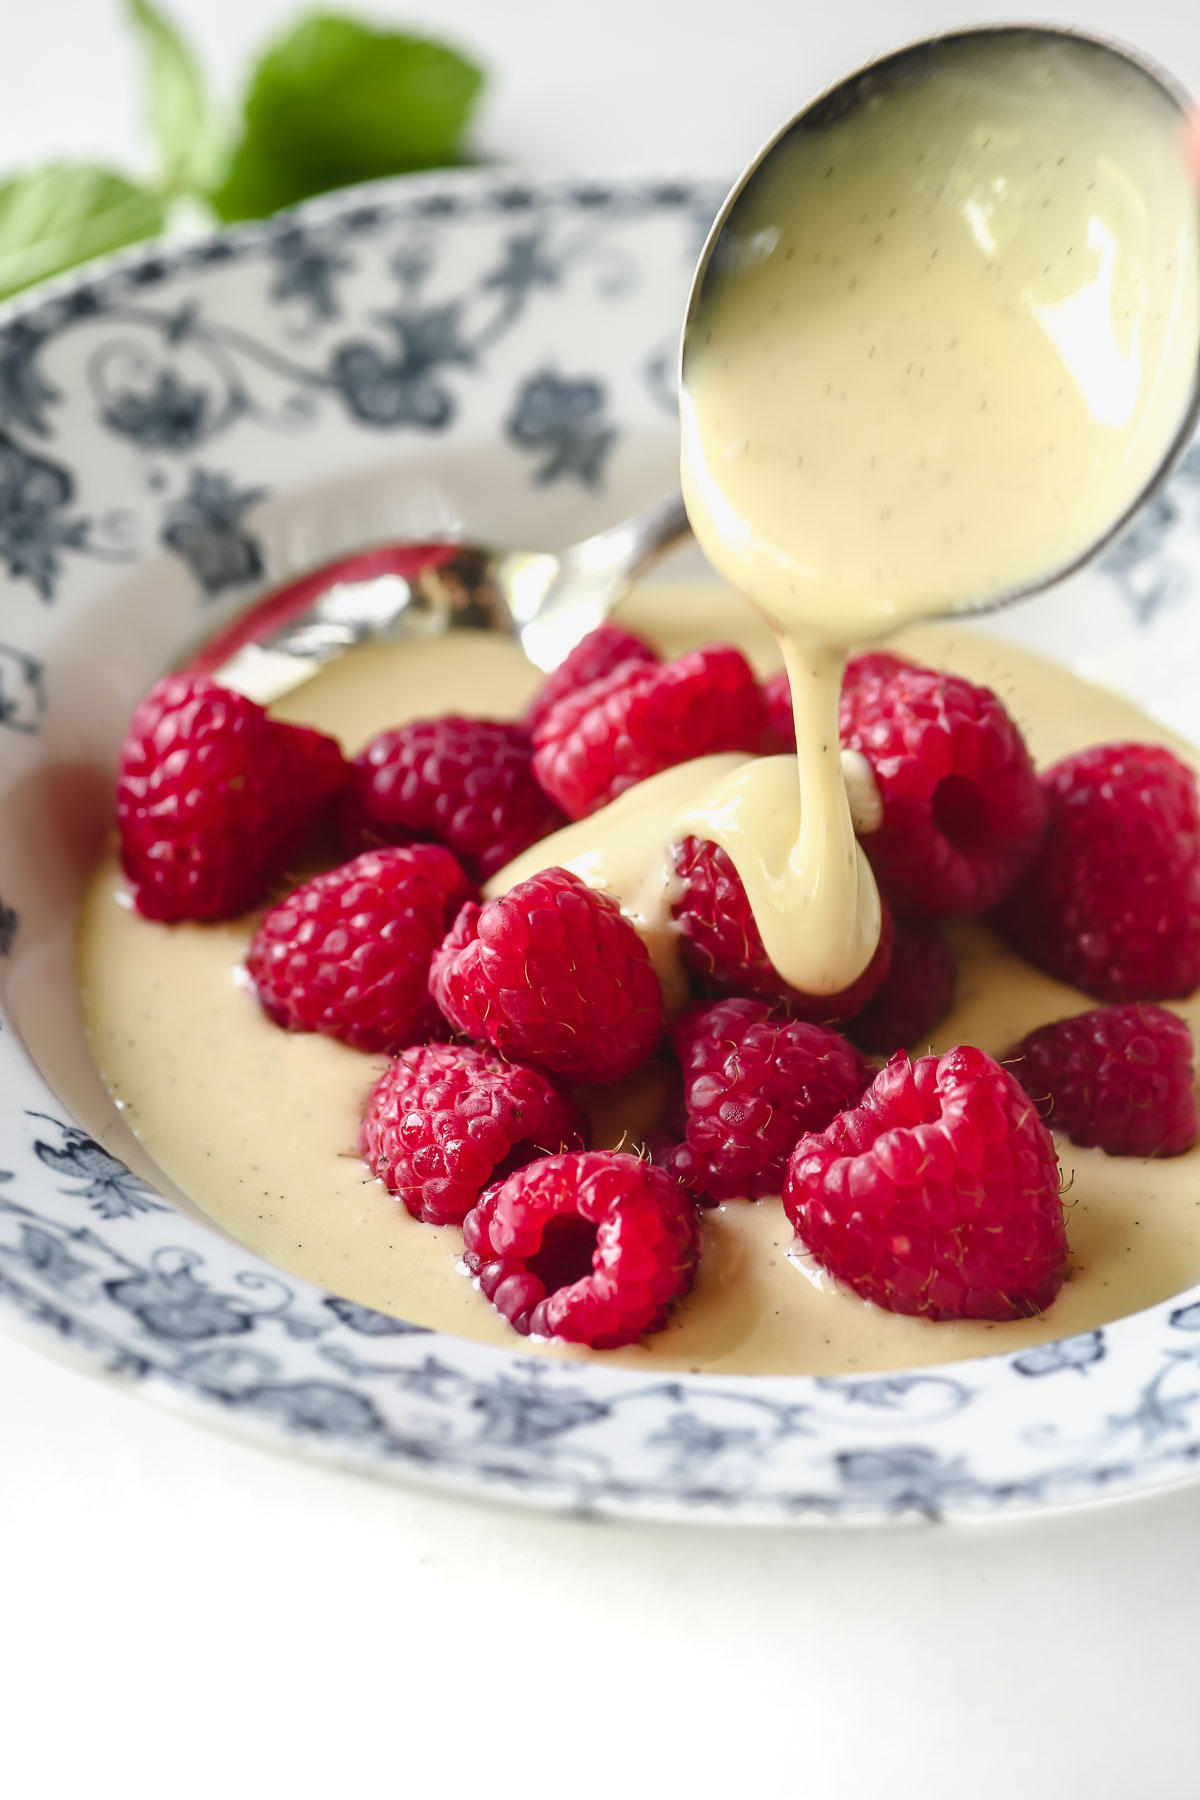 spooning crème anglaise over raspberries.